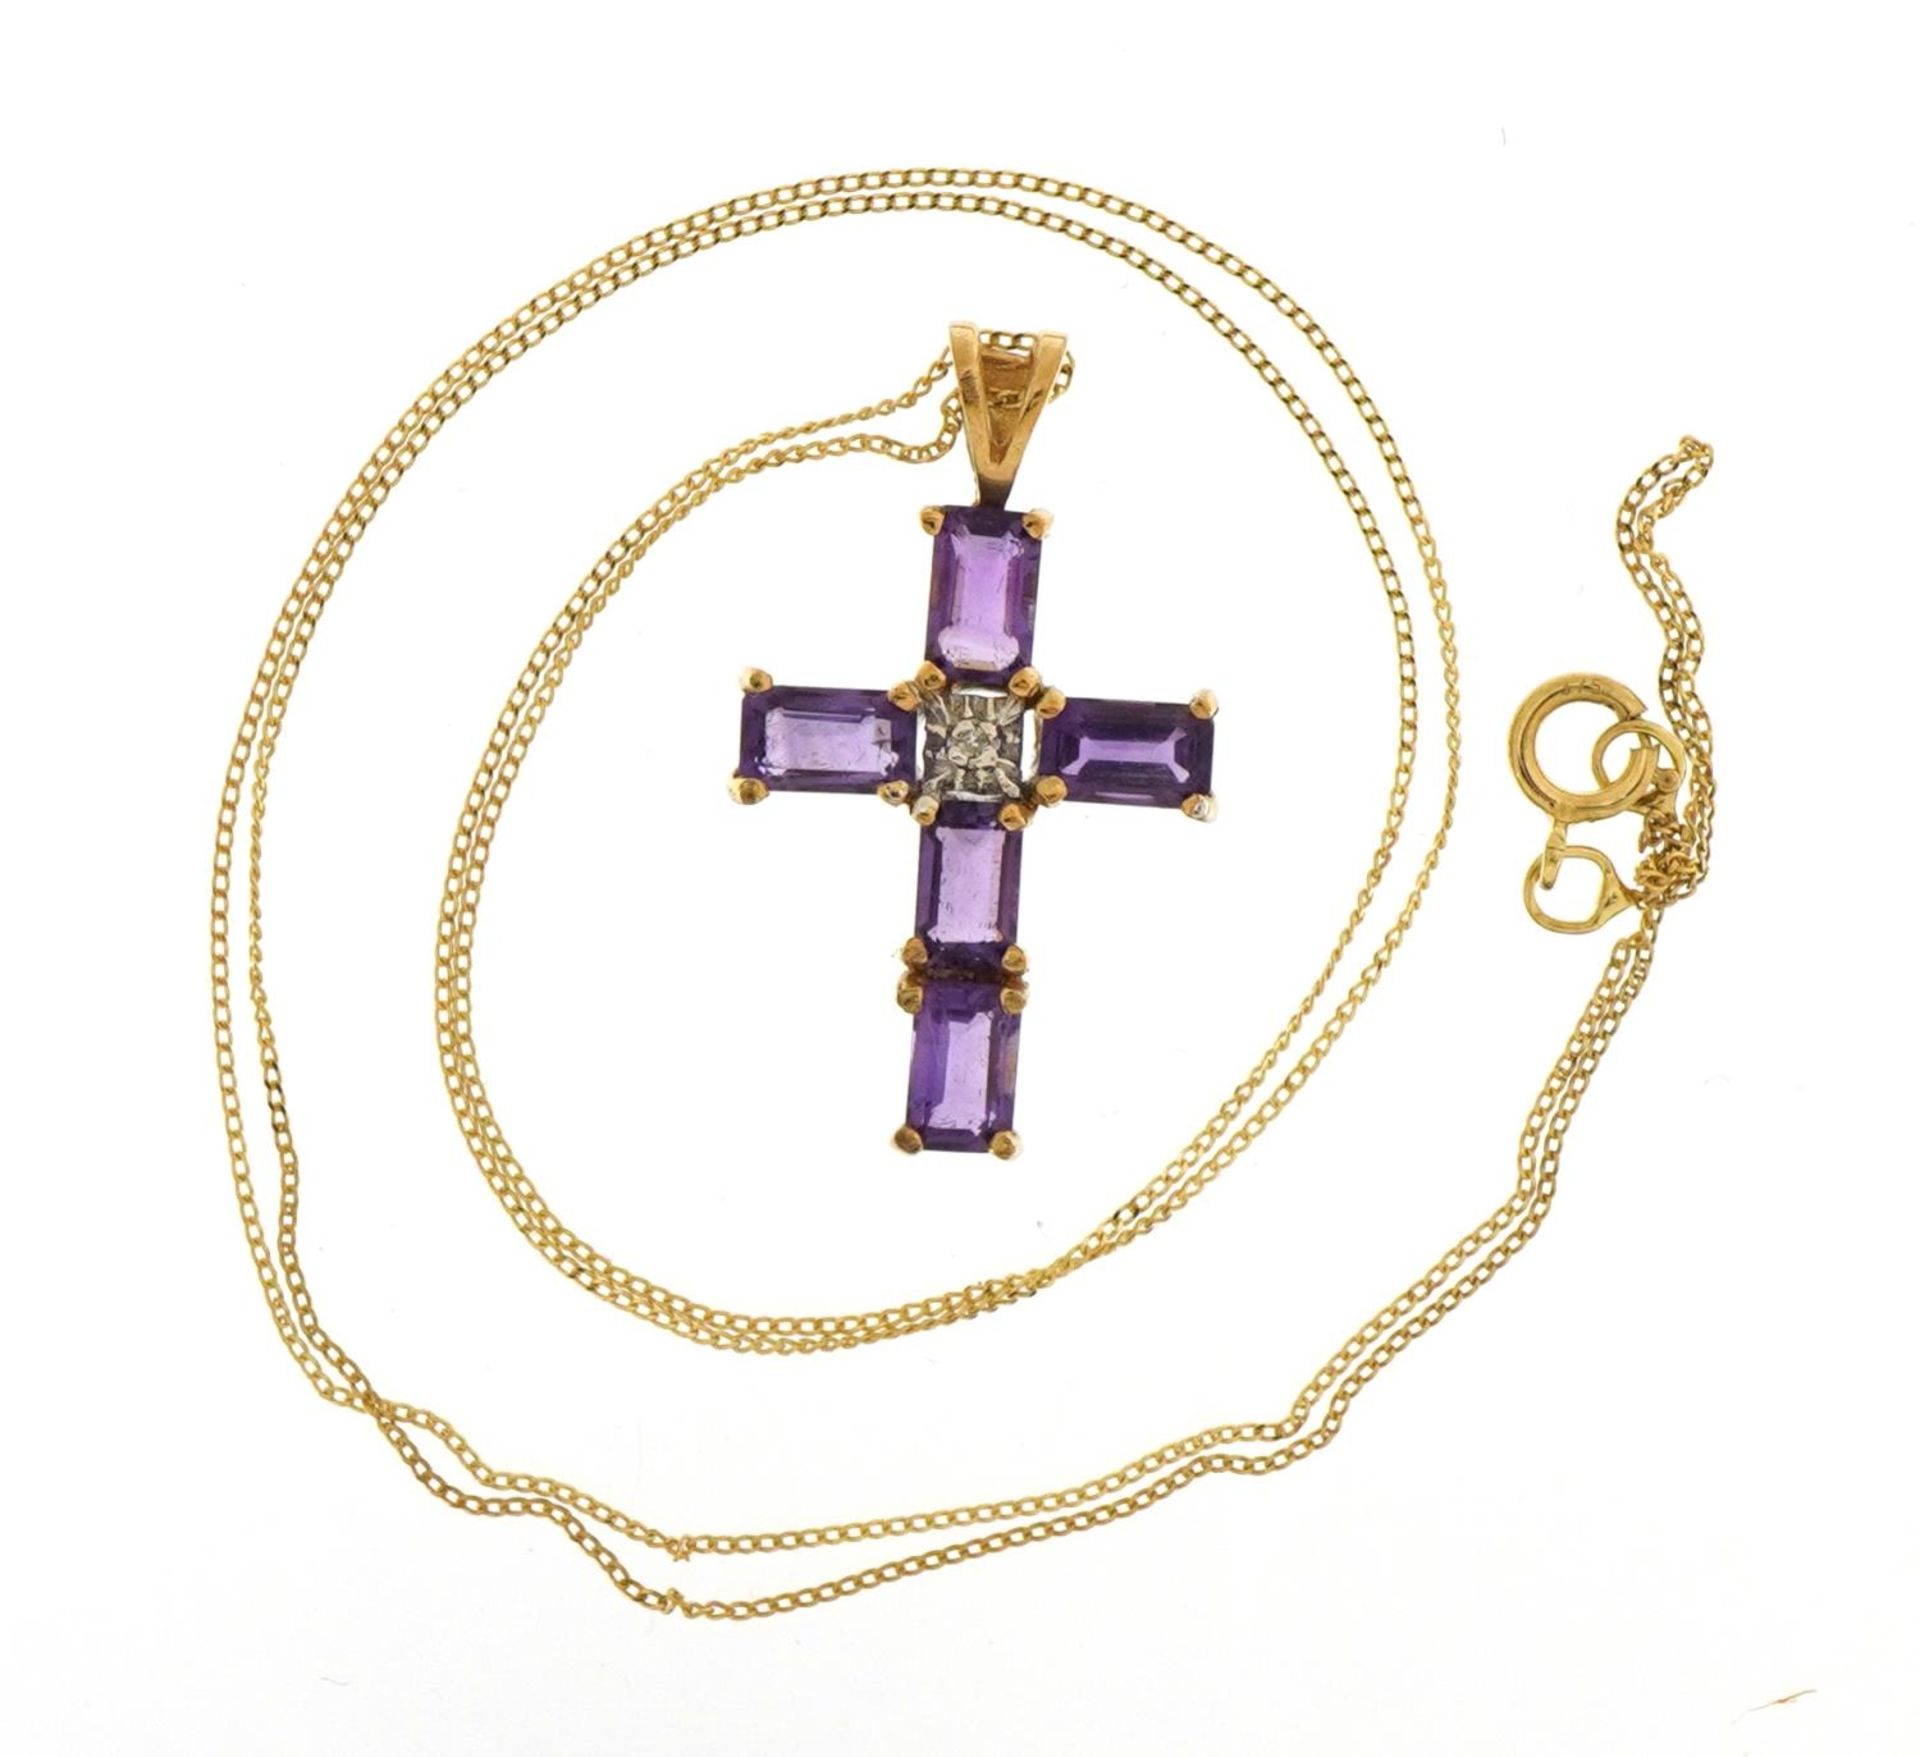 9ct gold amethyst and diamond cross pendant on a 9ct gold necklace, 2.4cm high and 45cm in length, - Image 2 of 4